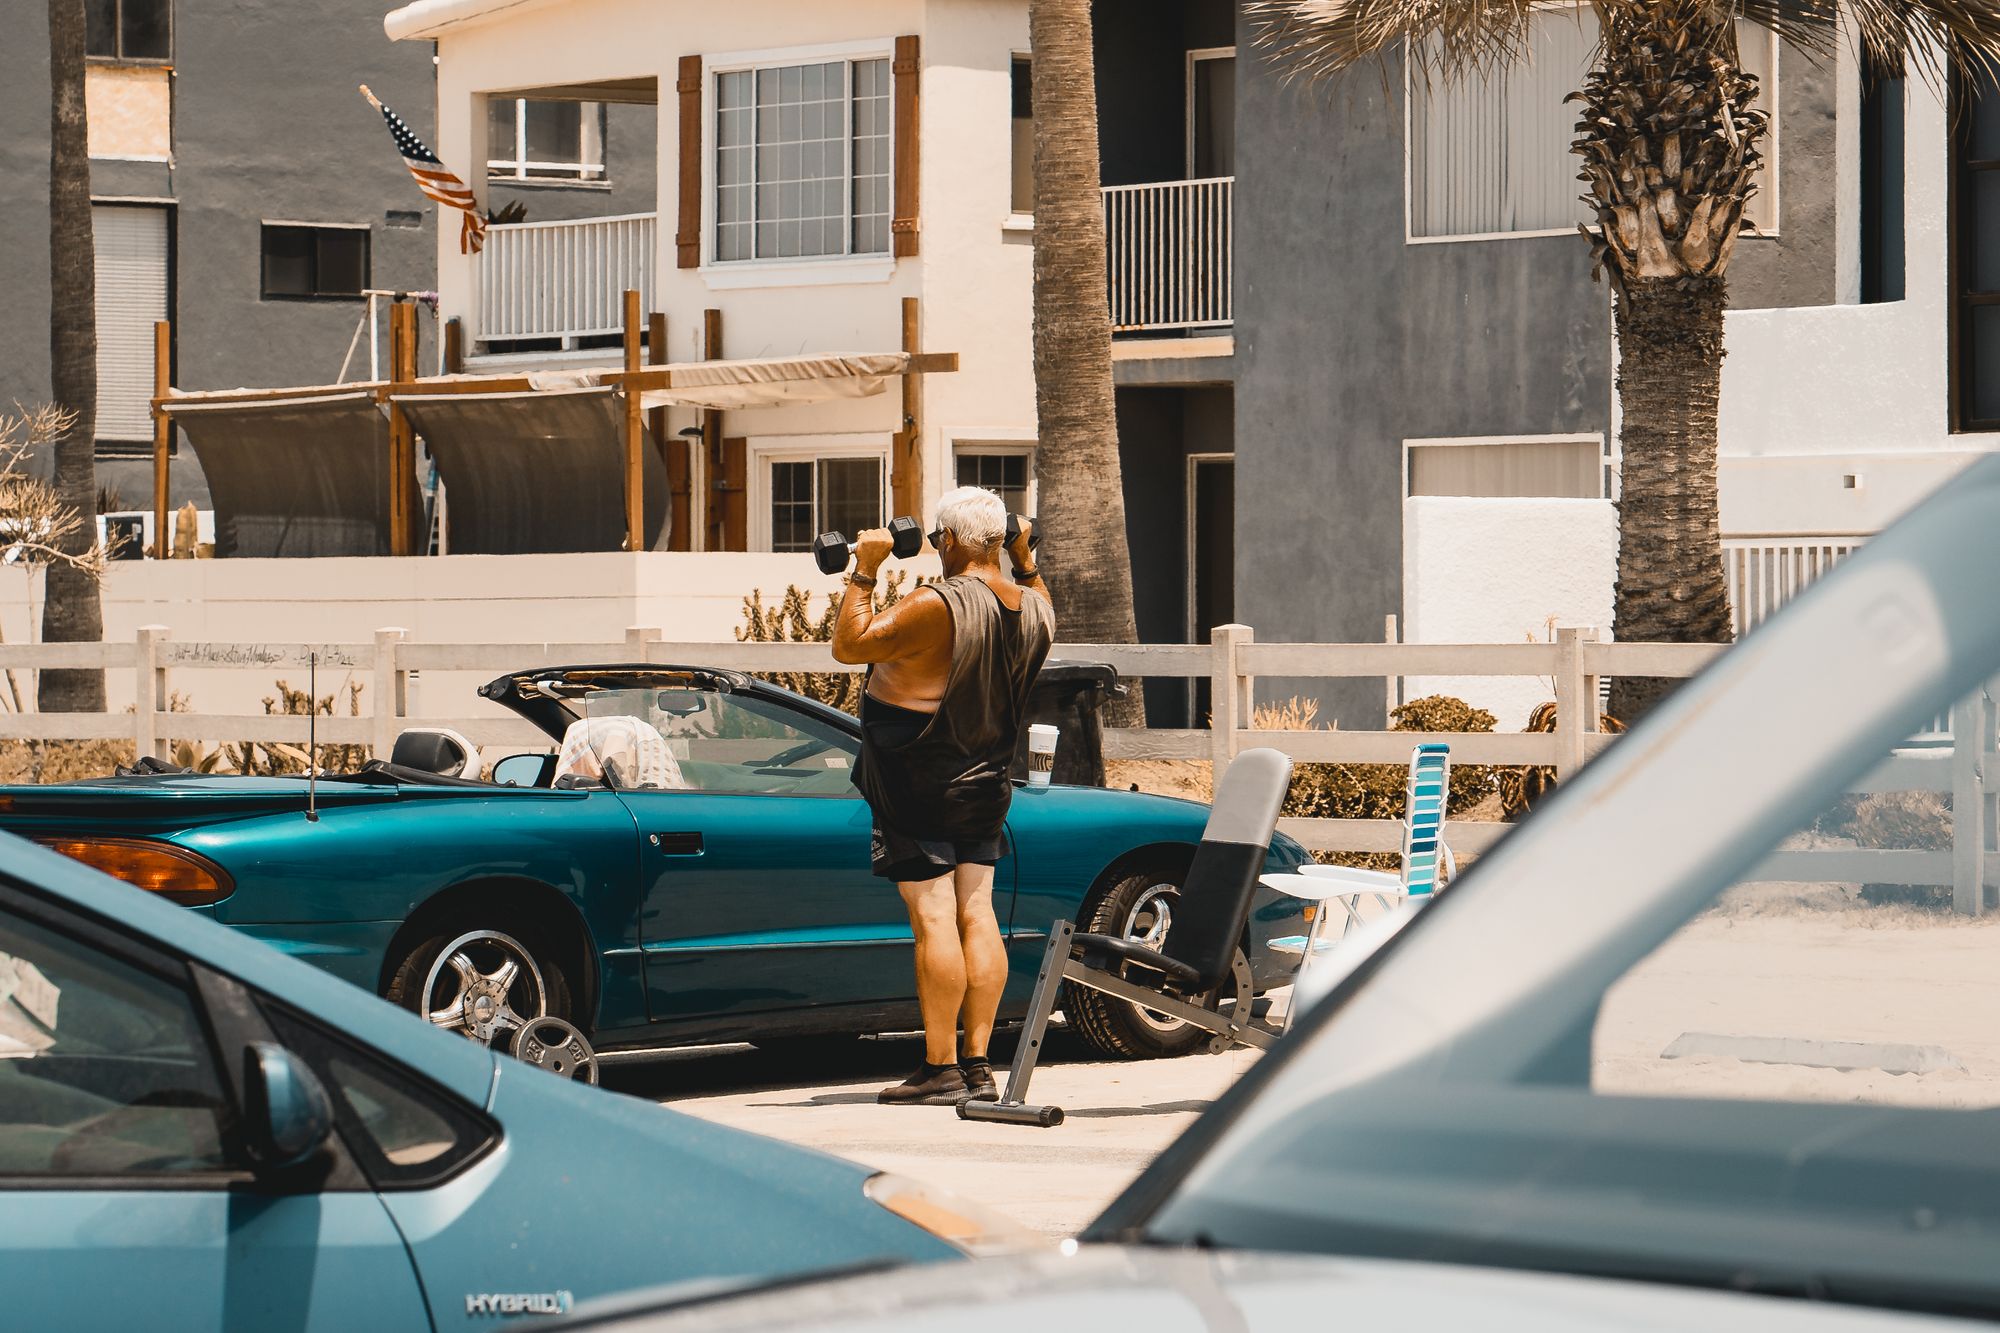 Parking lot dreams unfold at California's Venice Beach, just west of Los Angeles.